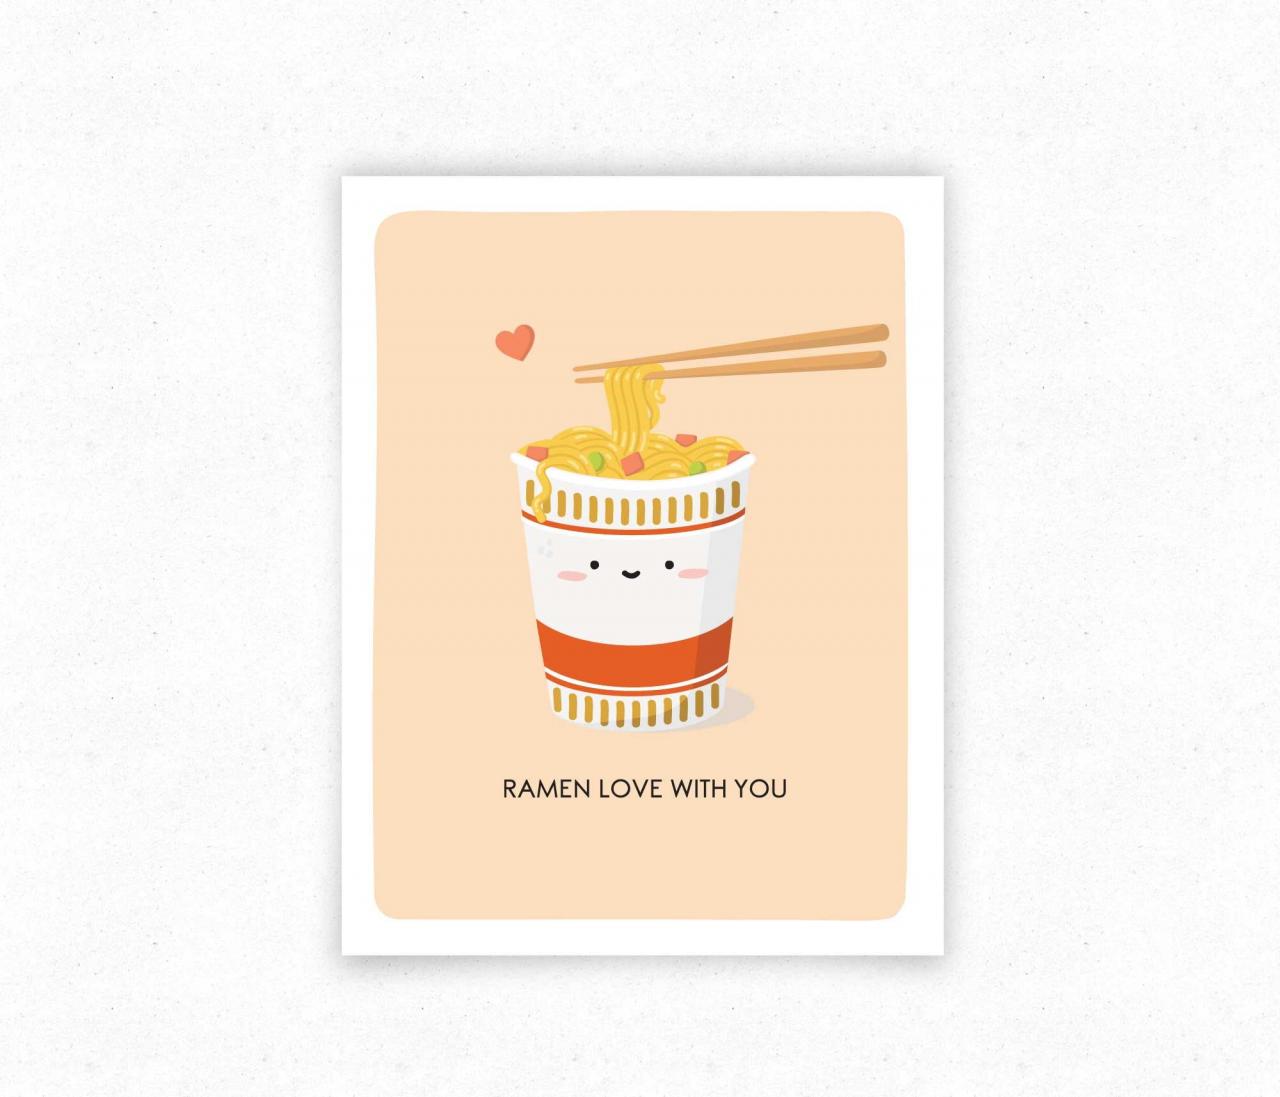 Ramen Cup Noodles Funny Food Pun Greeting Card, Just Because, Valentine's Day Card for Food Lover - Kawaii Asian Food